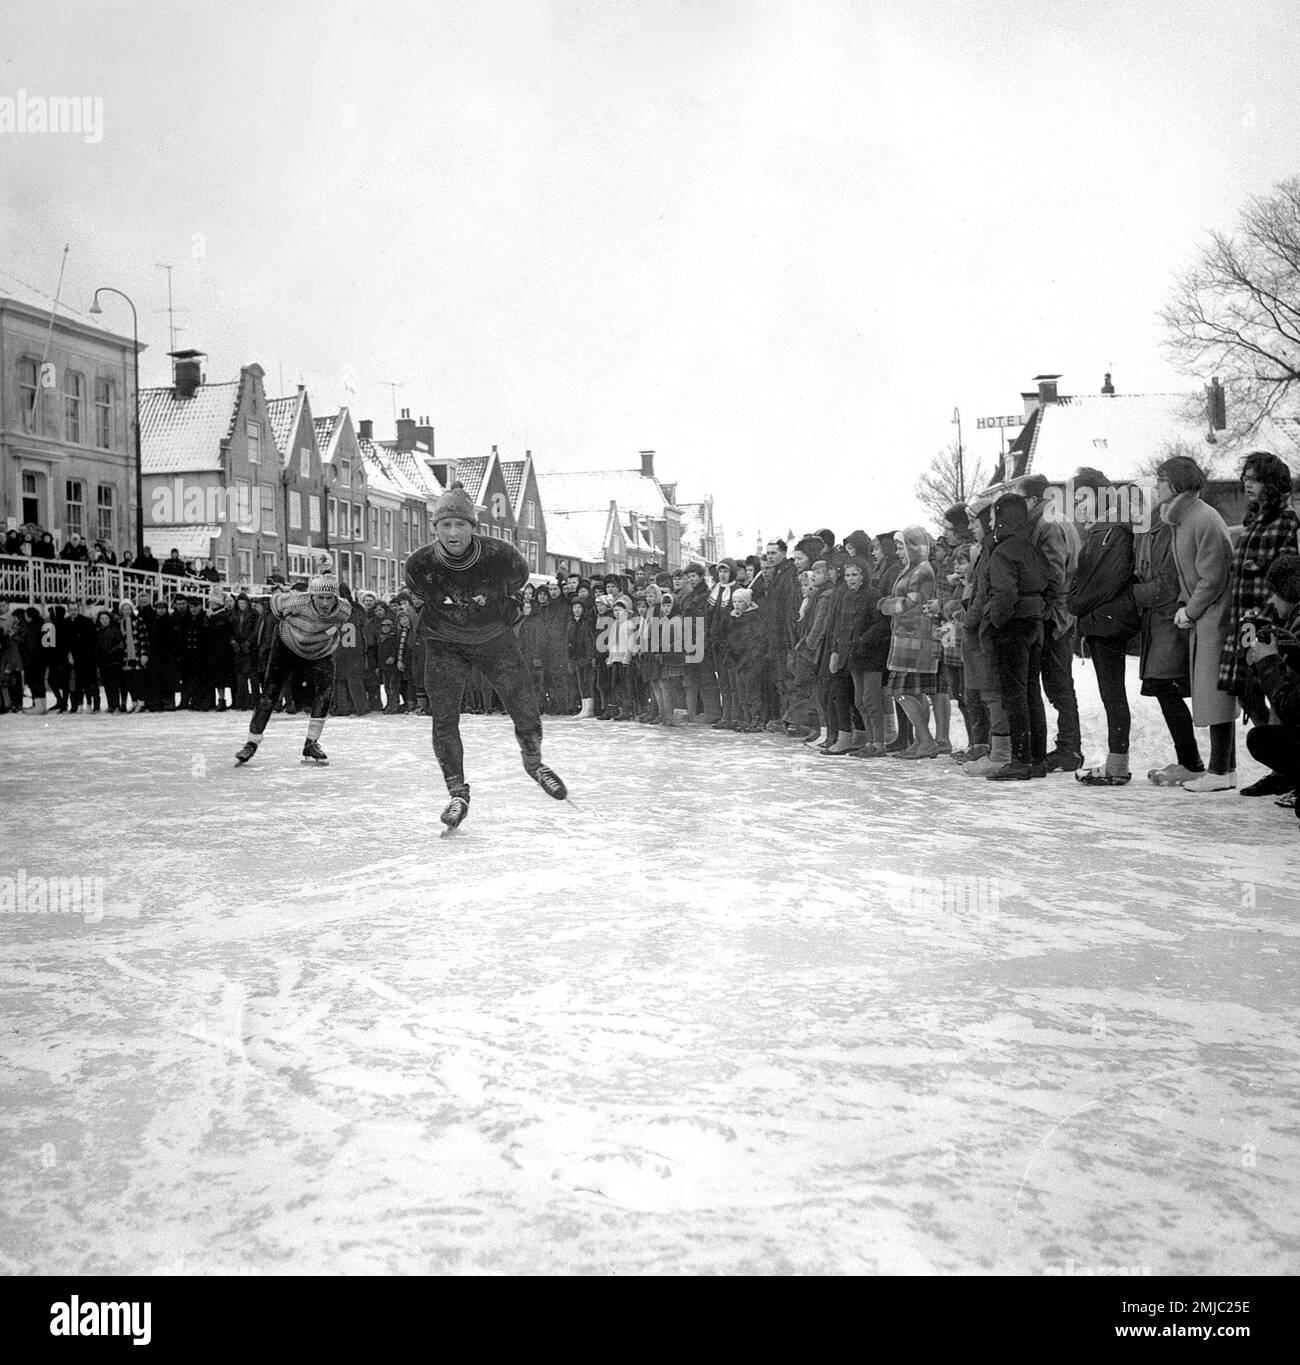 Netherlands History: In action; Anton Verhoeven (front) and Jan Uitham near Harlingen, skating in the Elfstedentocht, a long-distance tour skating event; Date: January 18, 1963 Stock Photo